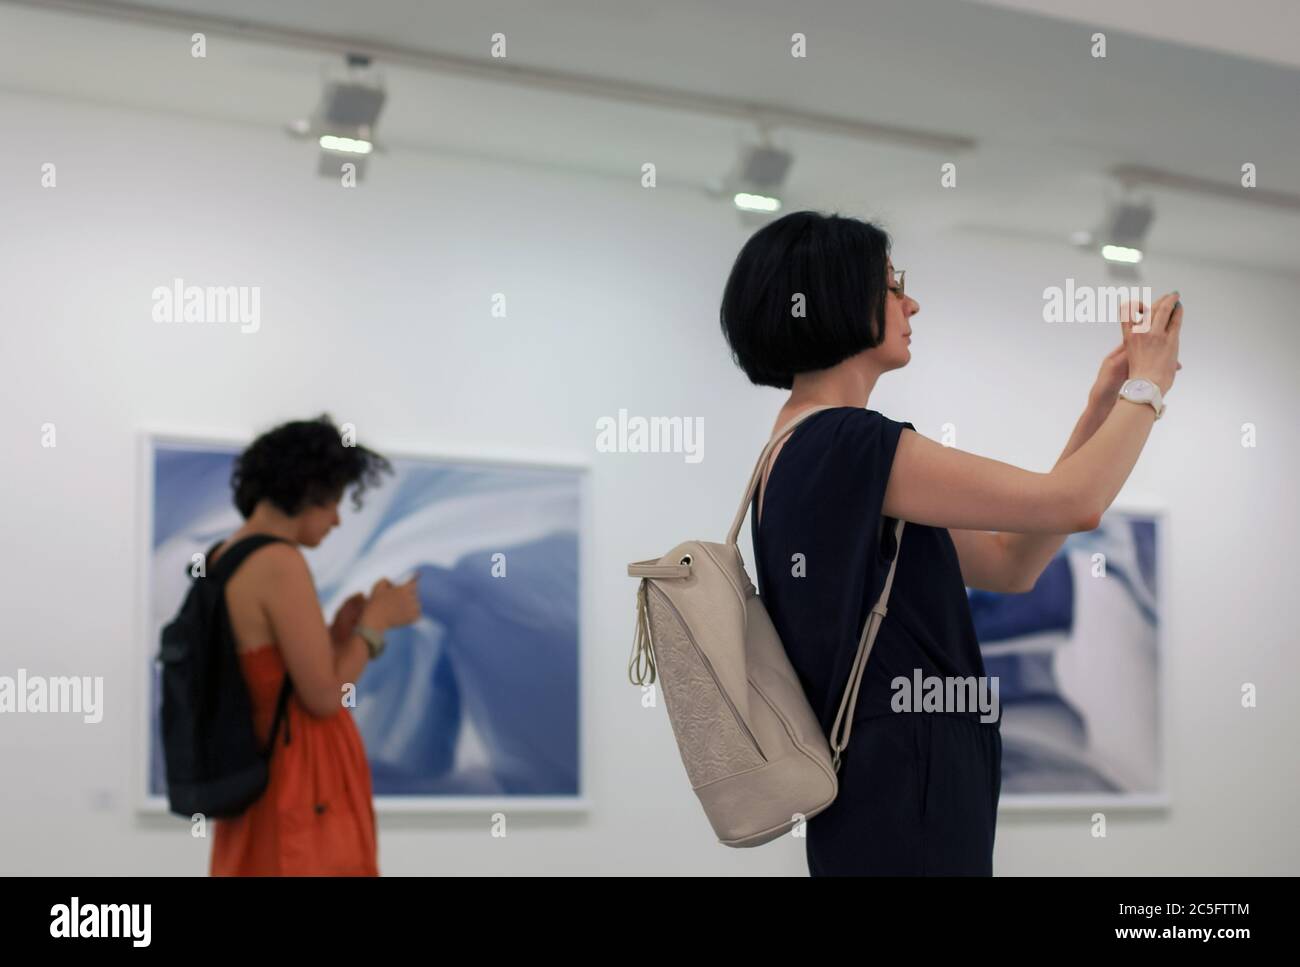 Moscow 11/06/2019 Woman taking pictures at photo exhibition with smartphone, other girl using messenger or social network on her mobile phone, instead Stock Photo